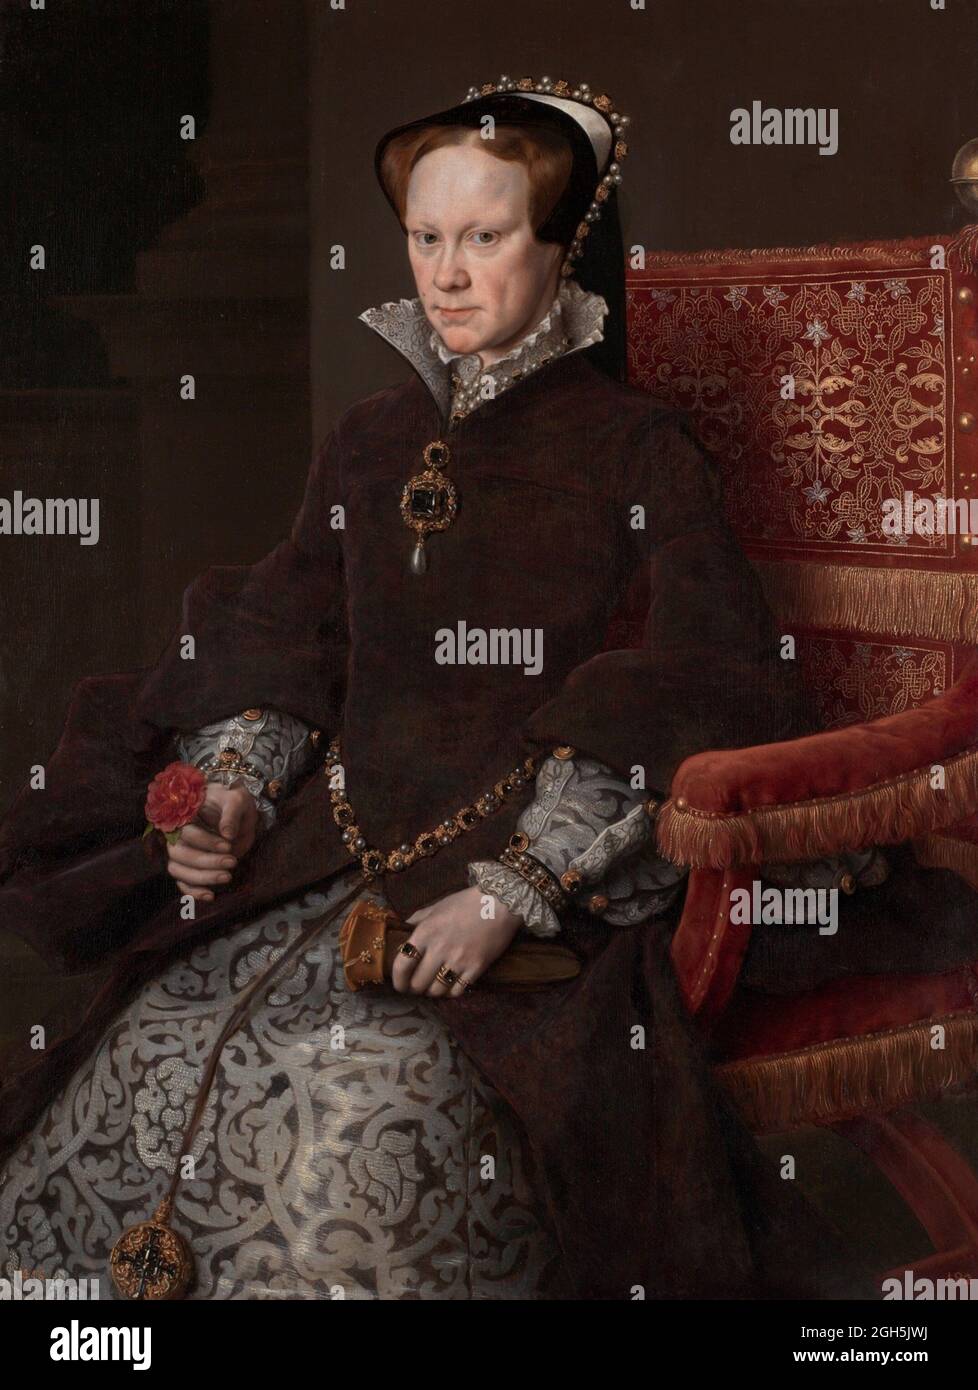 A portrait of Queen Mary I (Bloody Mary) who was Queen of England from 1553 until 1558 Stock Photo